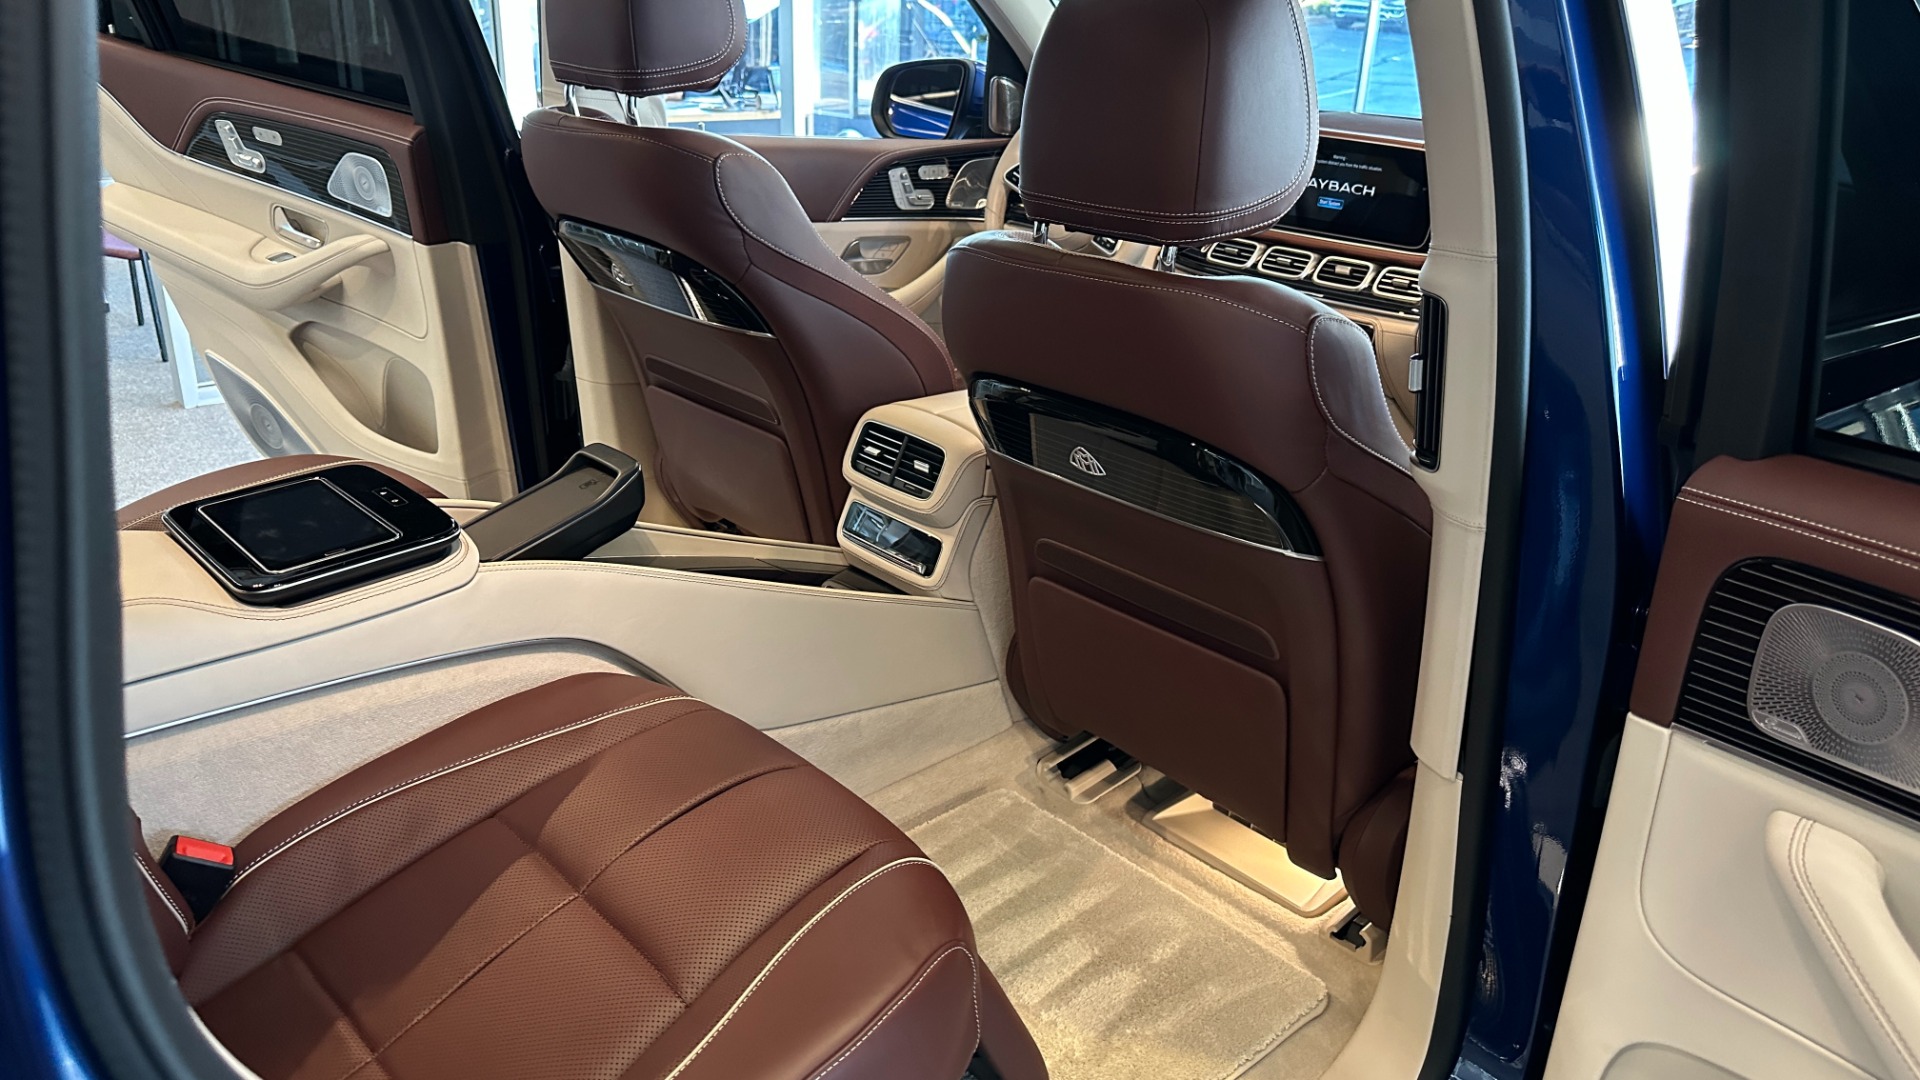 Used 2021 Mercedes-Benz GLS MAYBACH GLS600 / 23IN WHEELS / PIANO BLACK TRIM / CHAMPAGNE FRIDGE for sale $216,995 at Formula Imports in Charlotte NC 28227 22